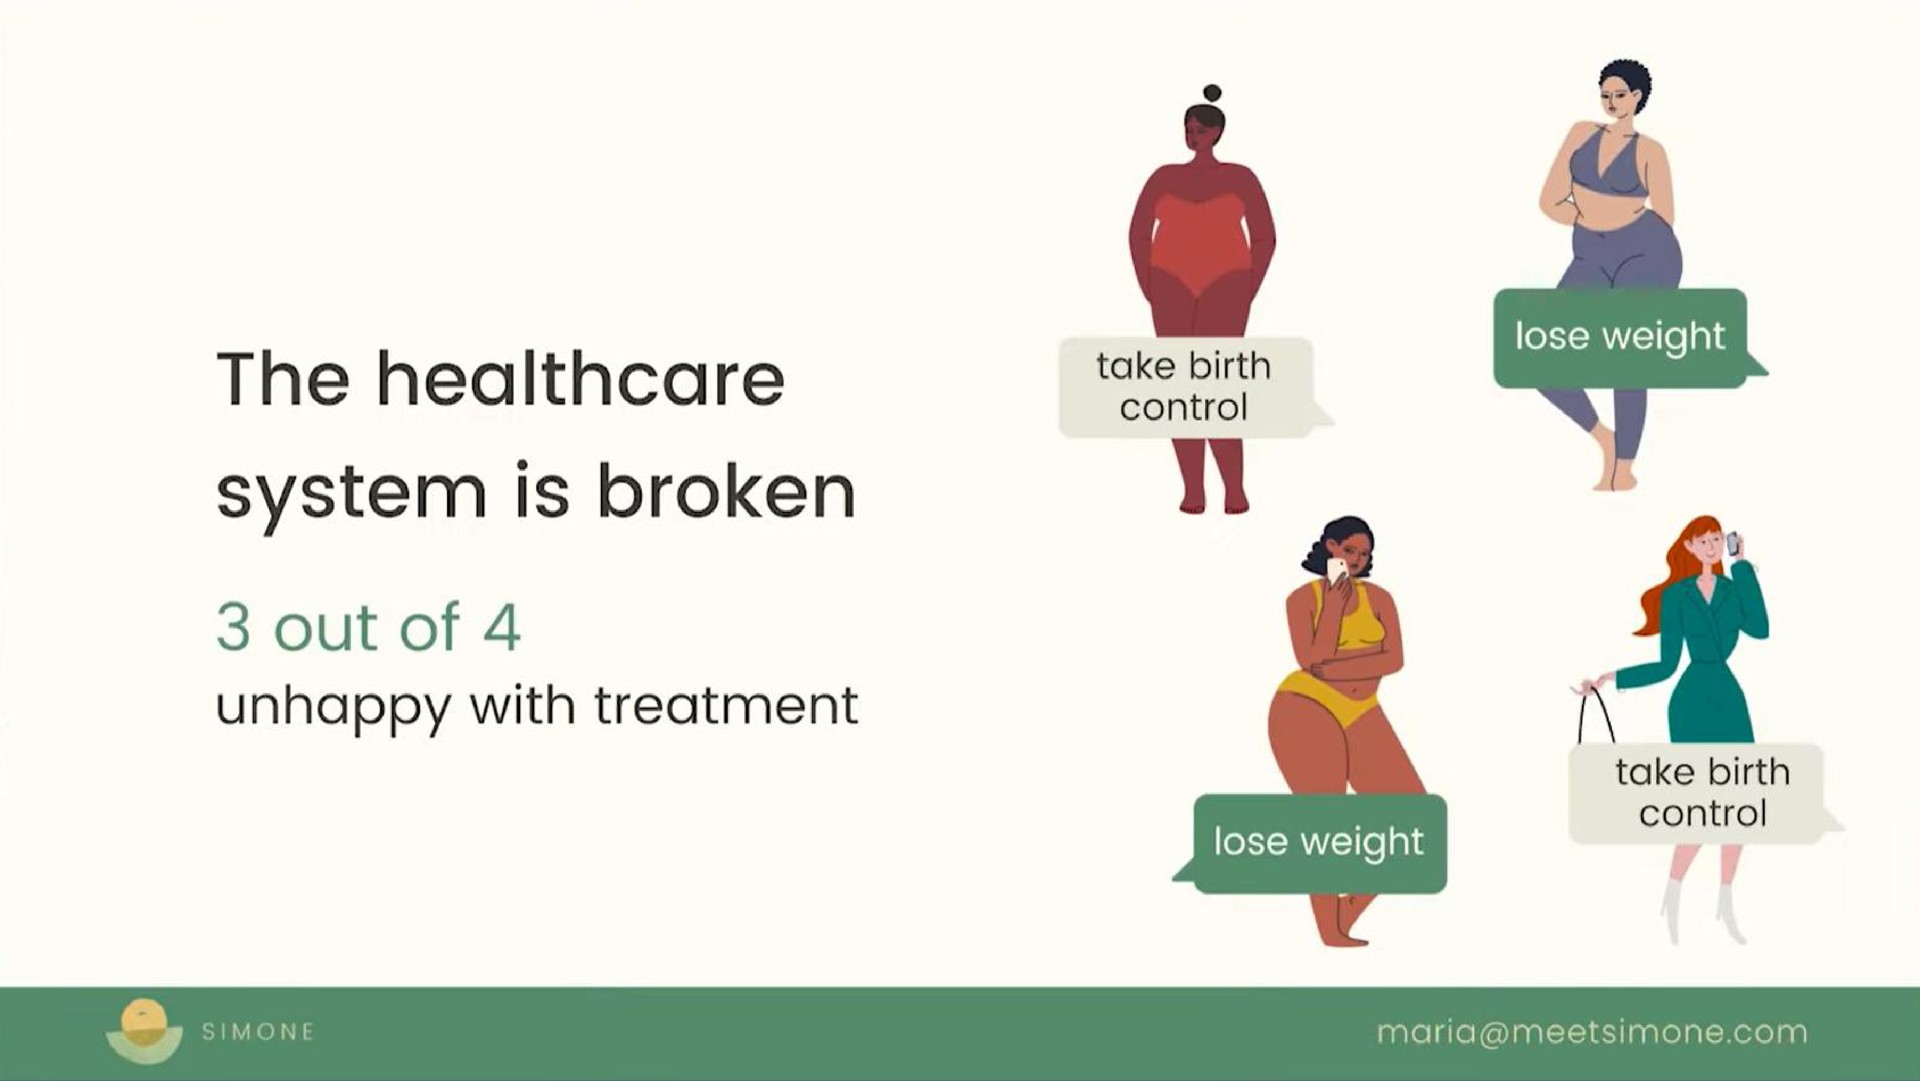 lose weight the system is broken lose weight maria out of unhappy with treatment take birth control | Simone